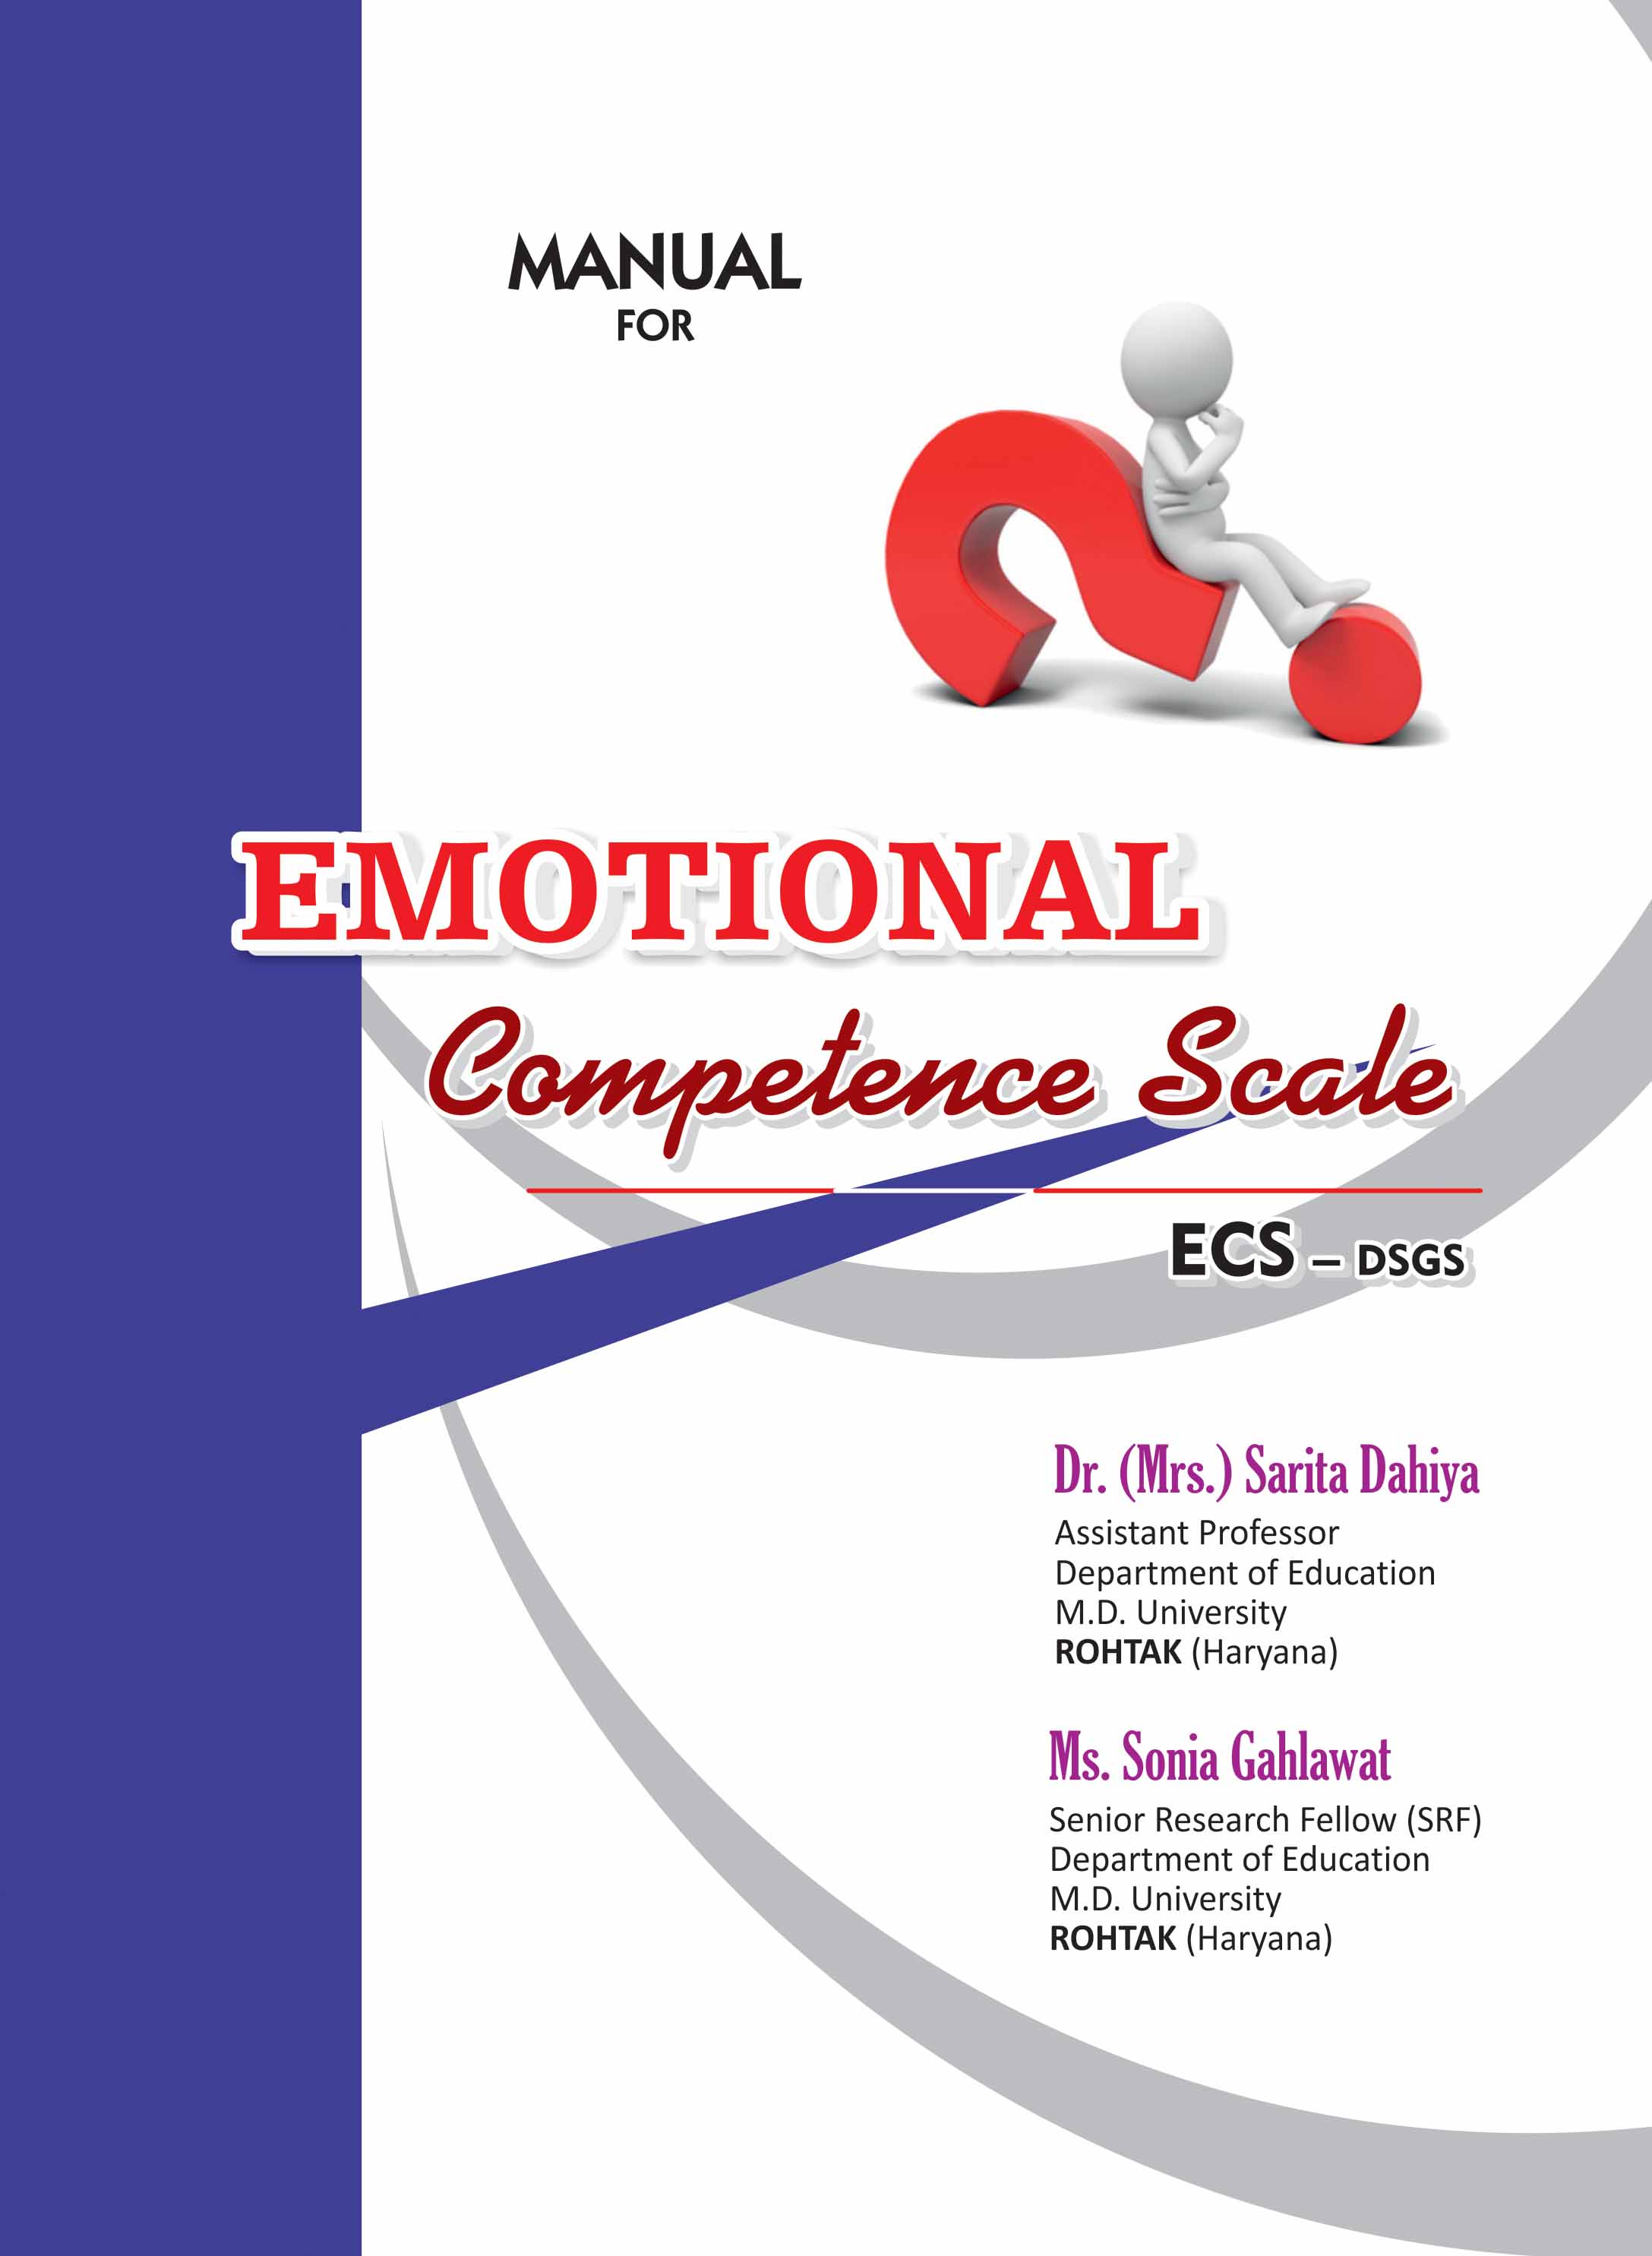 EMOTIONAL-COMPETENCY-SCALE